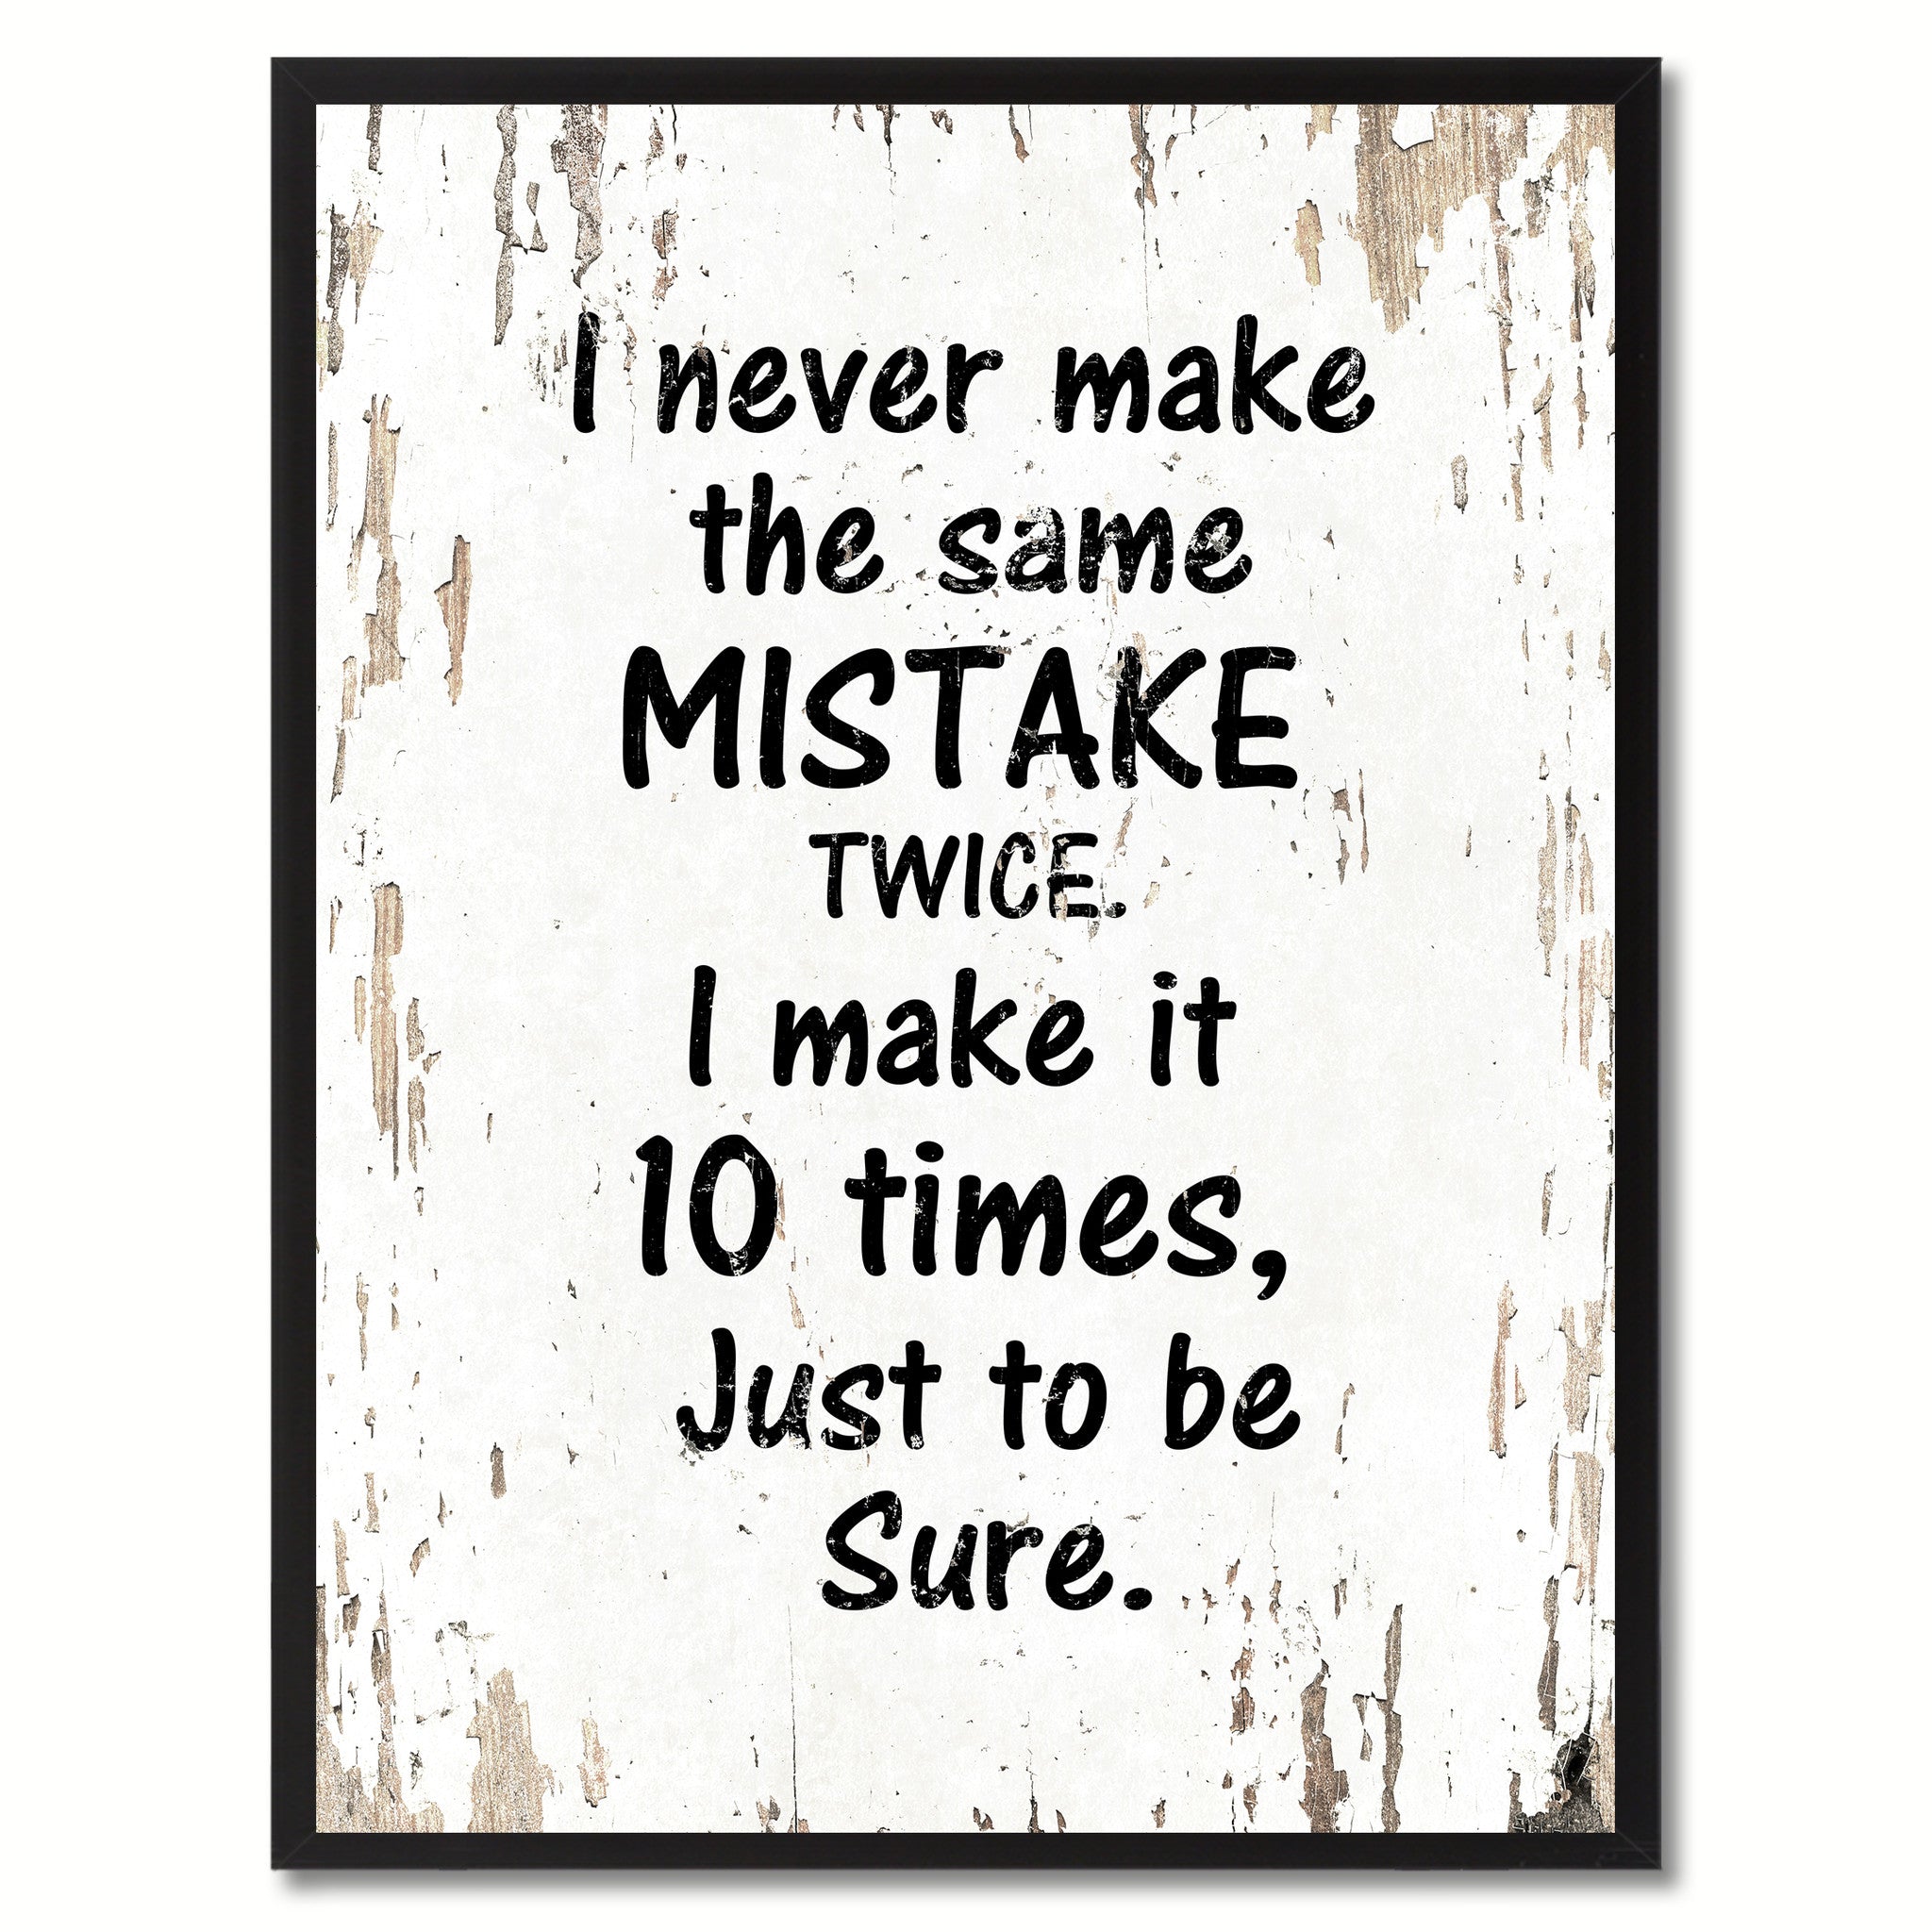 I never make the same mistake twice I make it 10 times just to be sure Motivation Quote Saying Gift Ideas Home Decor Wall Art